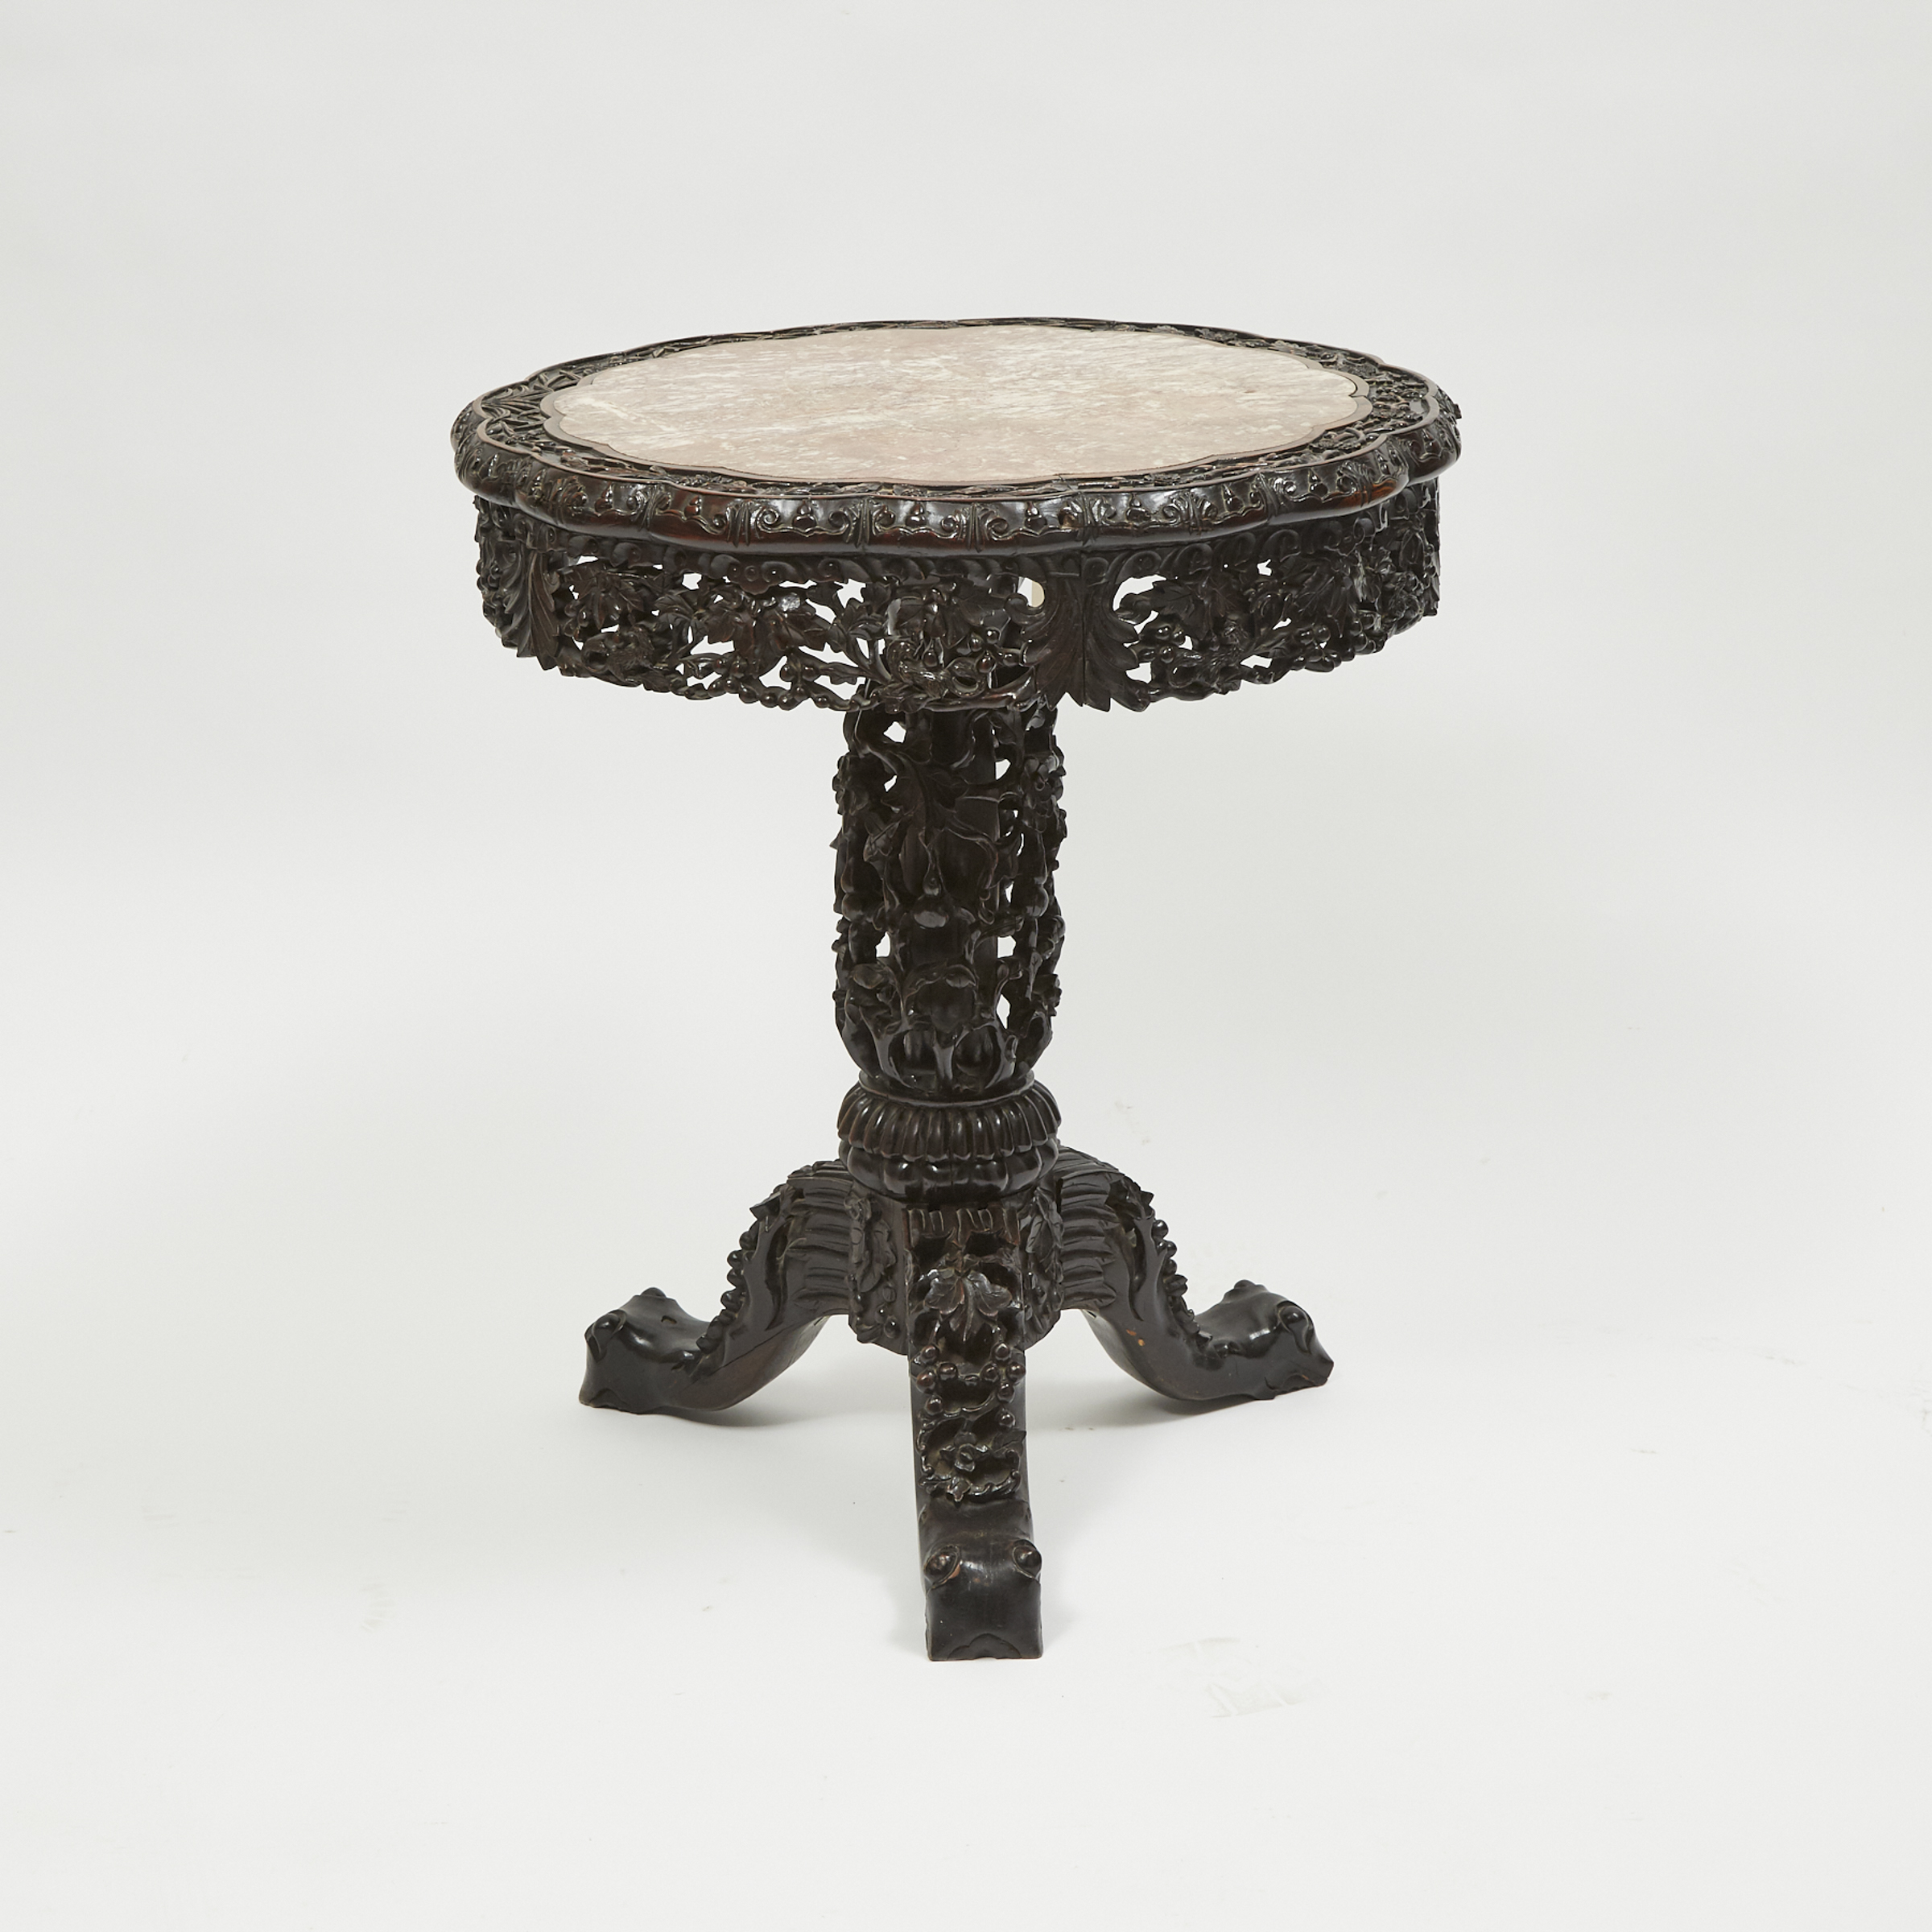 A Chinese Marble Inlaid Side Table, Late 19th/Early 20th Century